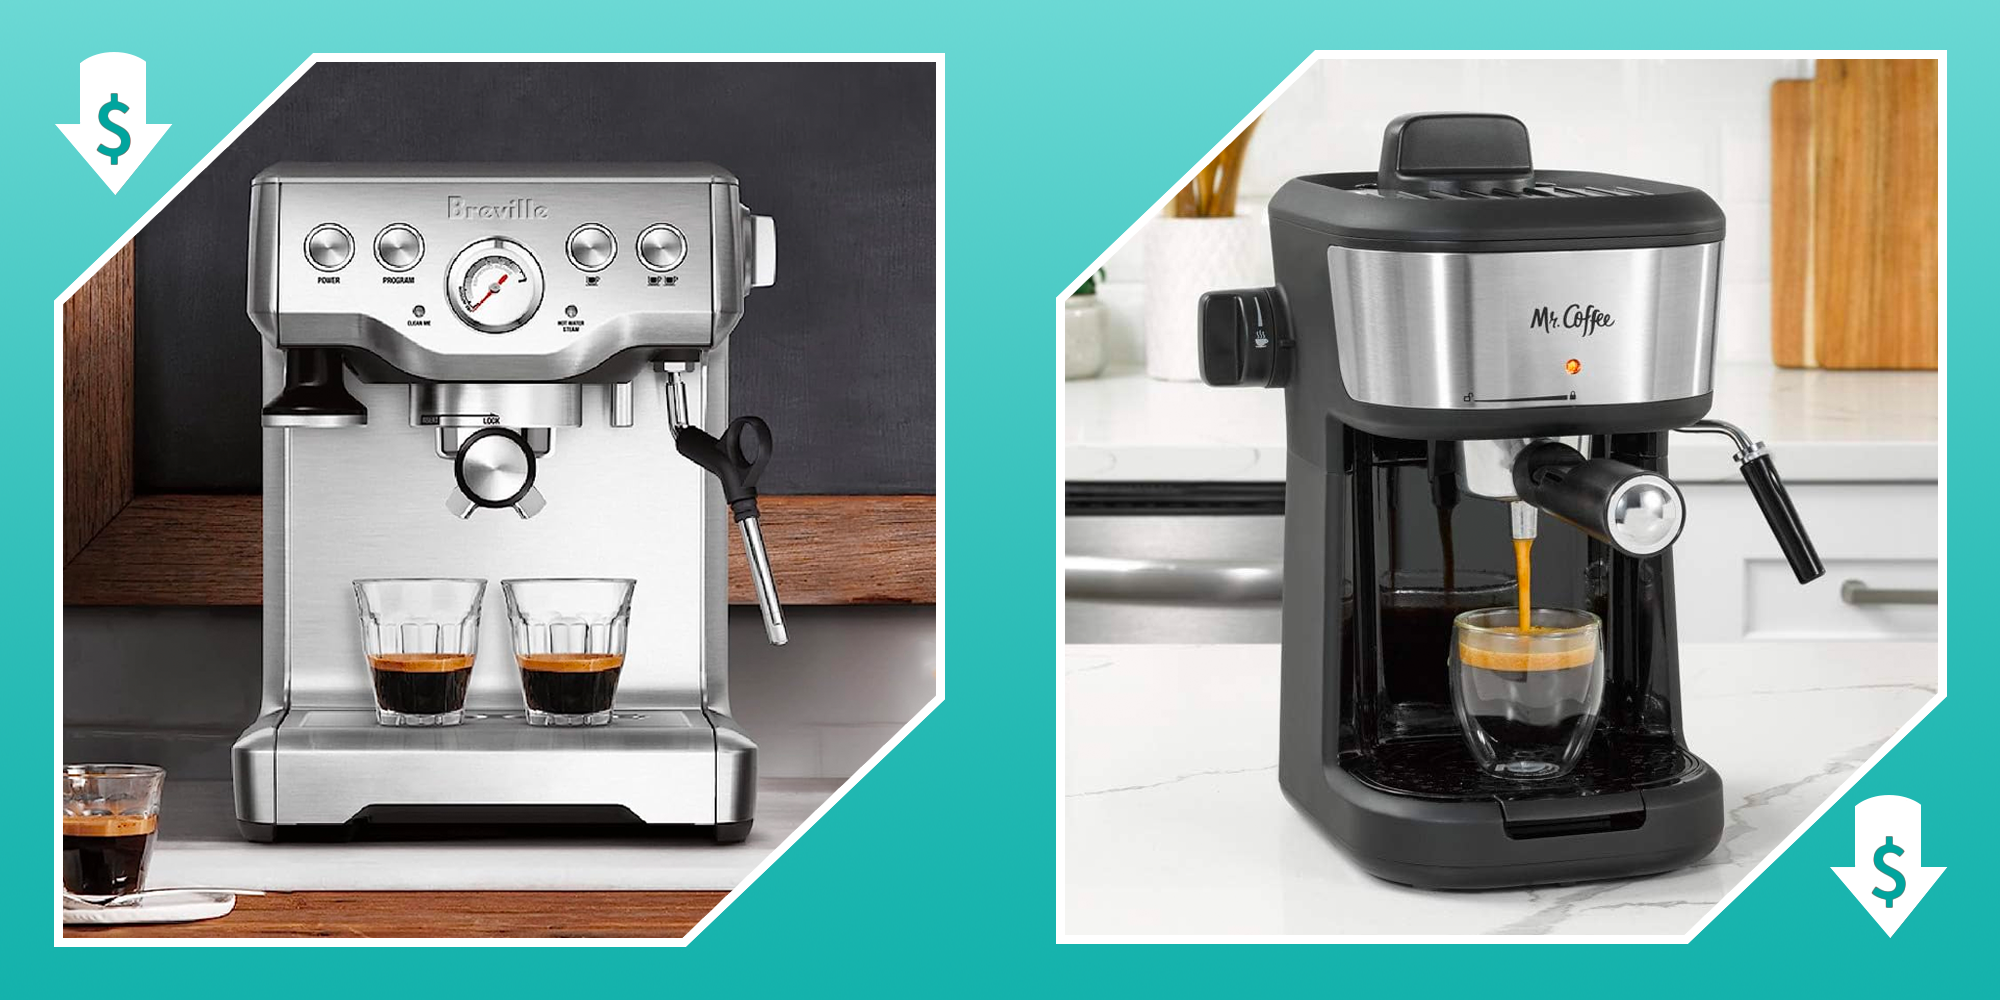 The Moccamaster Coffee Maker Never Goes On Sale — But It's 33% Off for Prime  Day